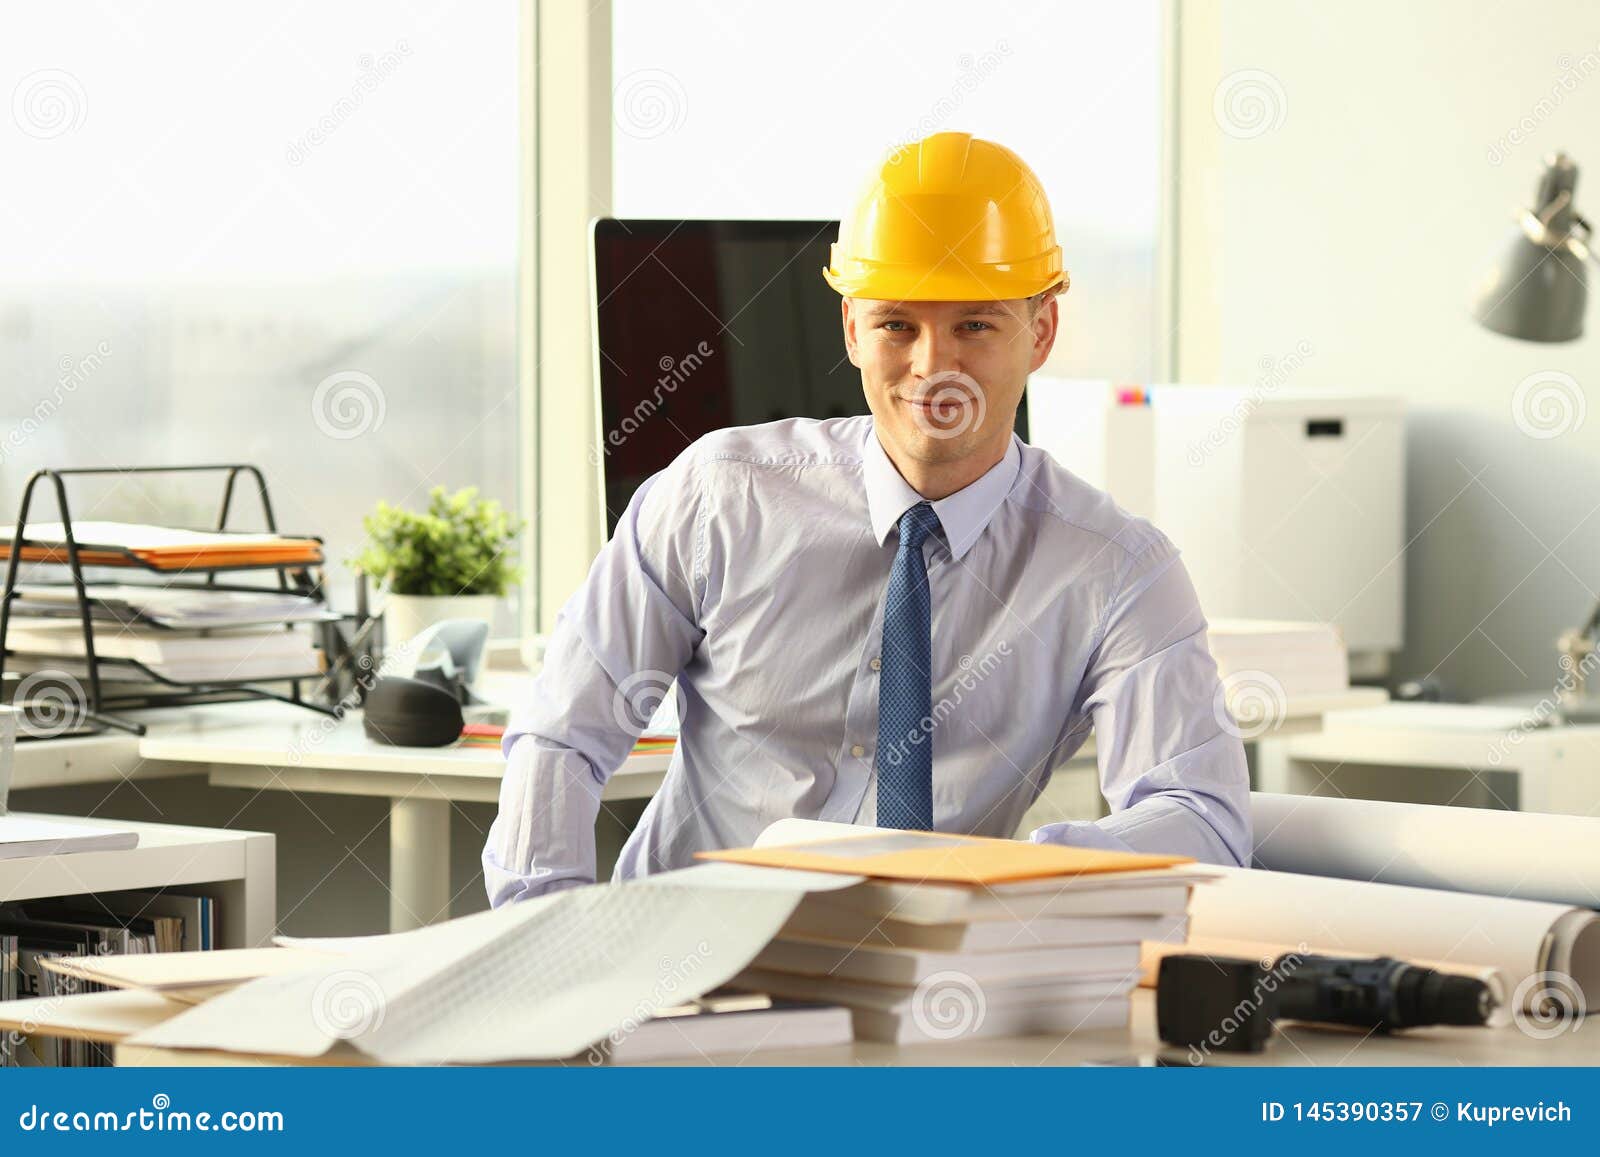 Smiling Civil Engineer Working on House Sketch Stock Image - Image of  business, designing: 145390357